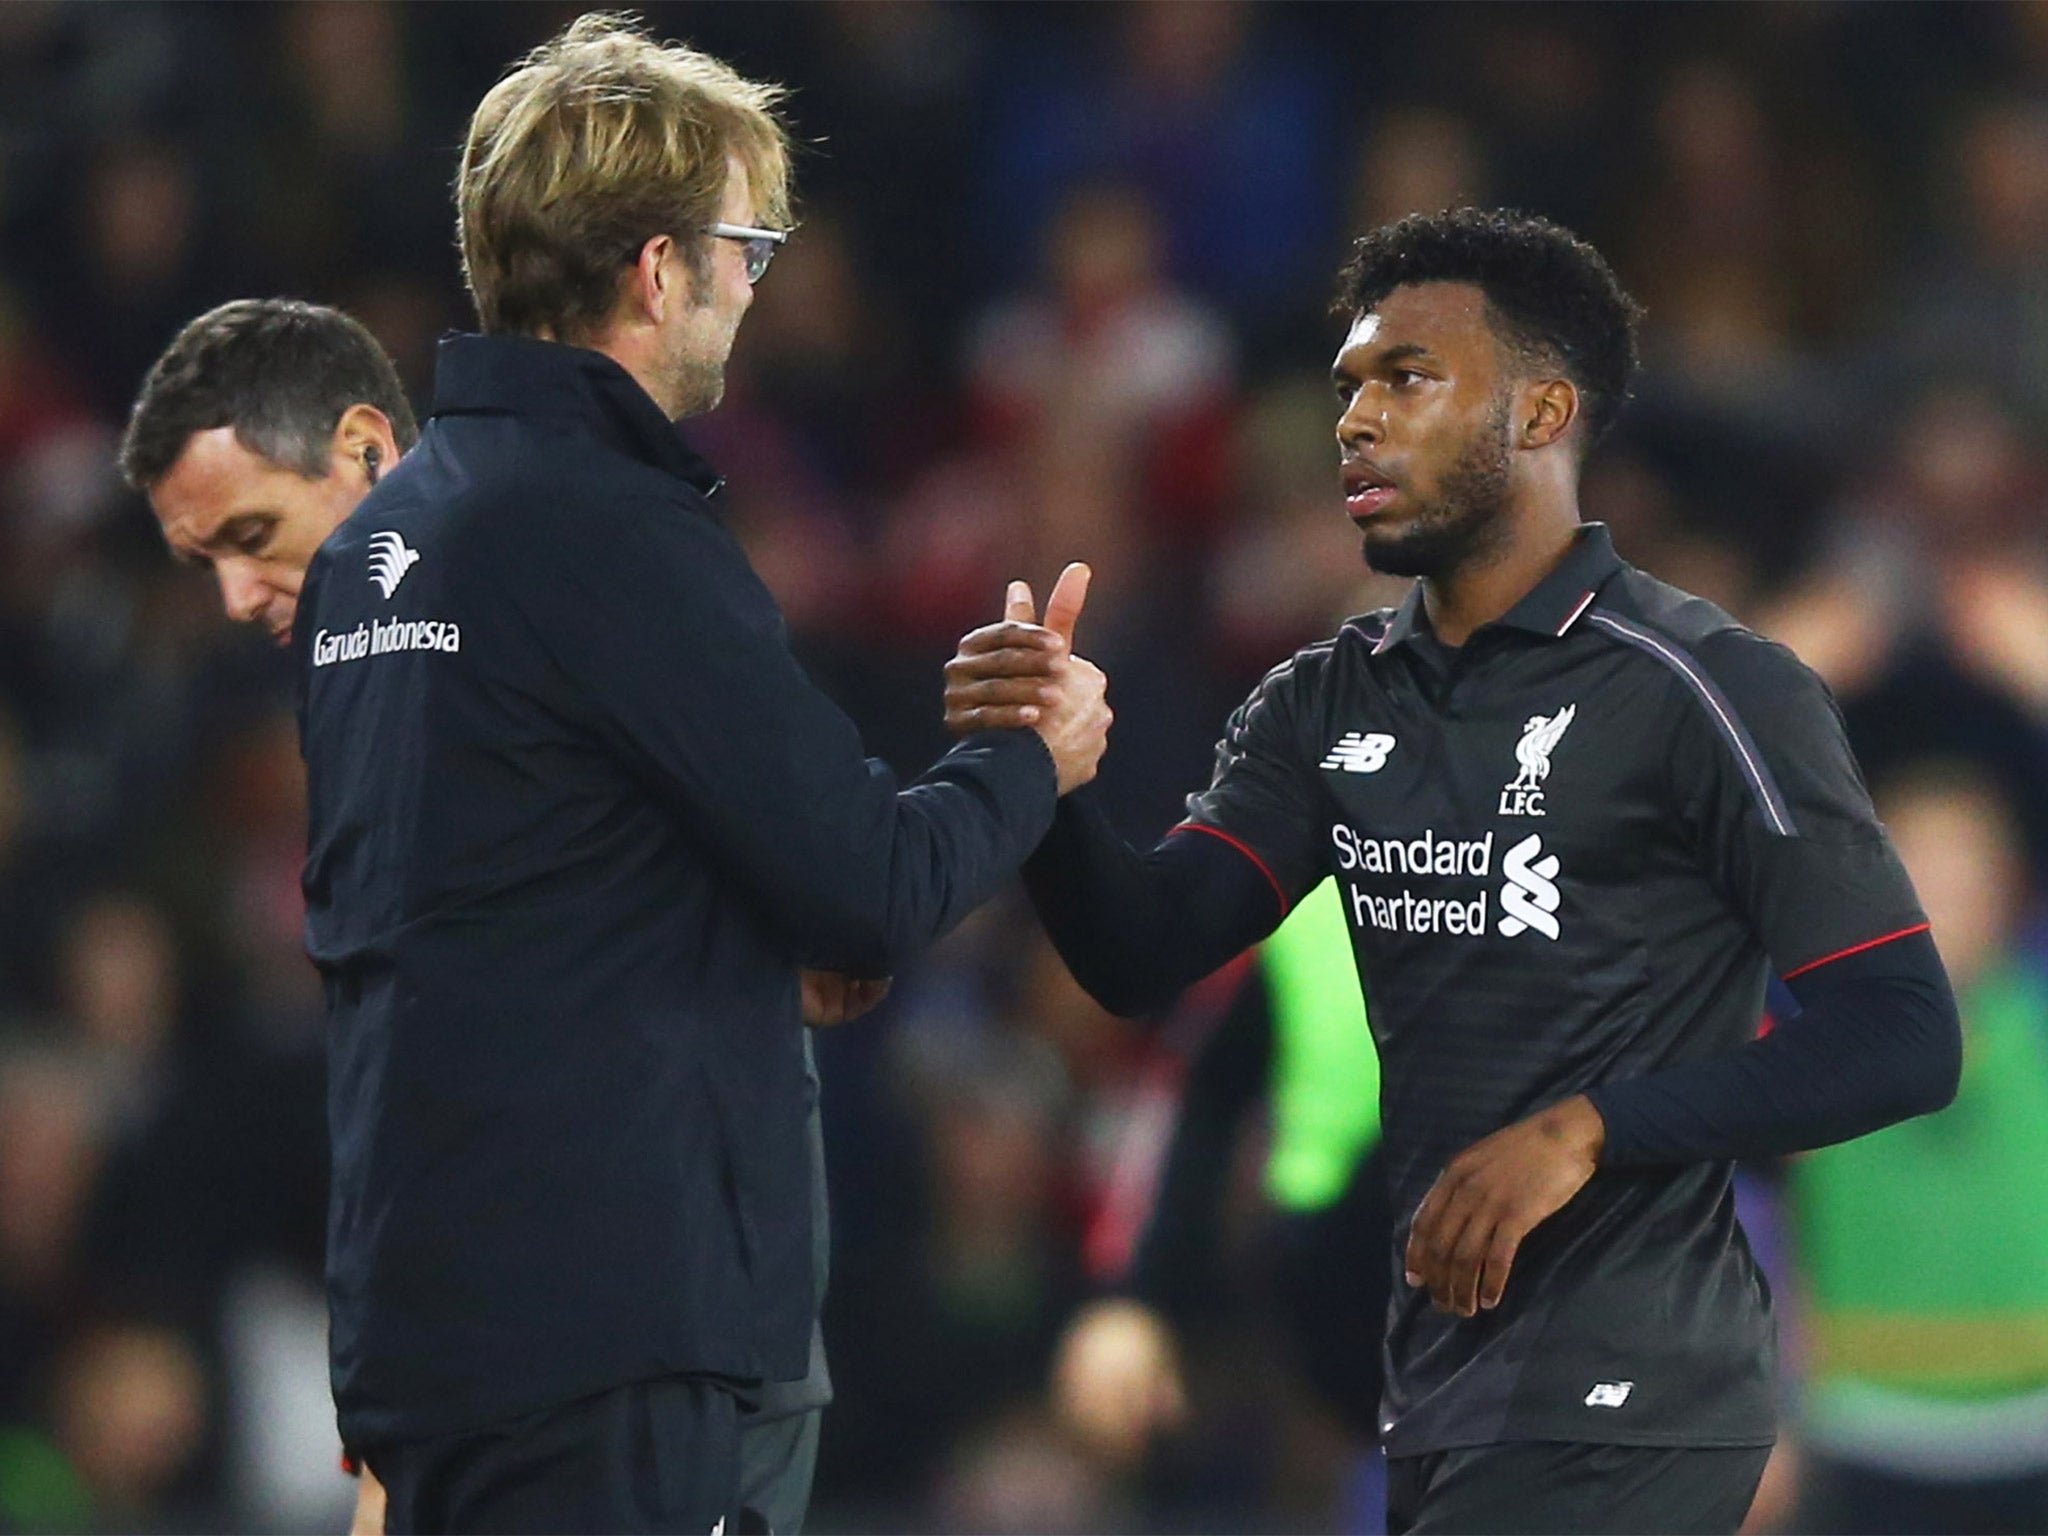 Daniel Sturridge of Liverpool shakes hands with Jurgen Klopp manager of Liverpool as he is substituted